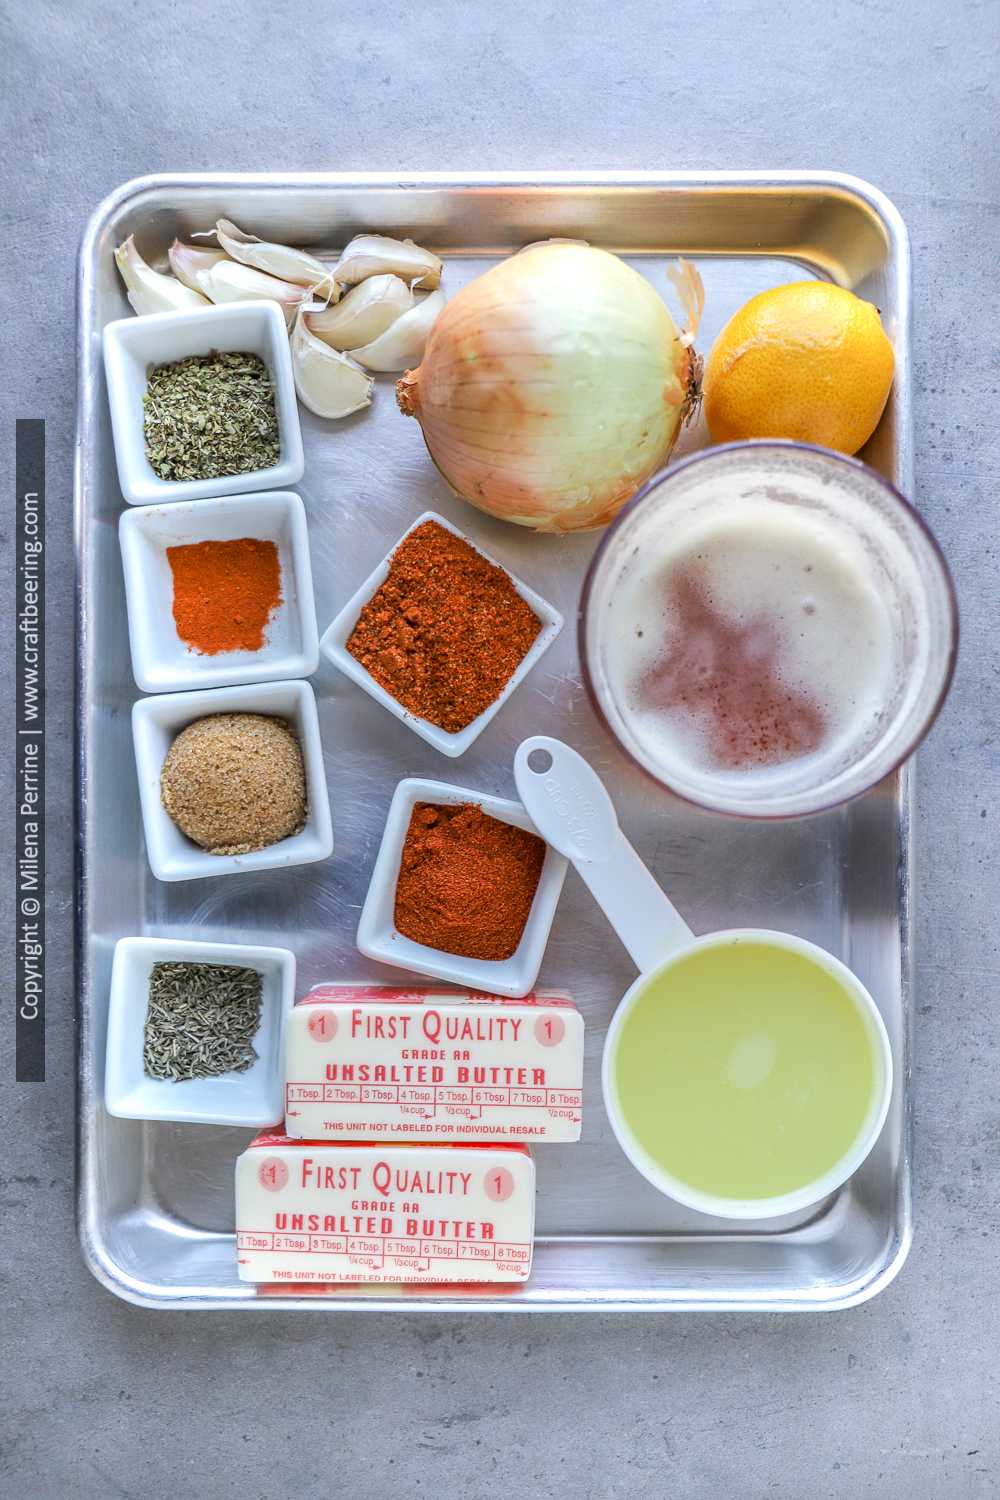 Ingredients for seafood boil sauce (very similar to bloves sauce)